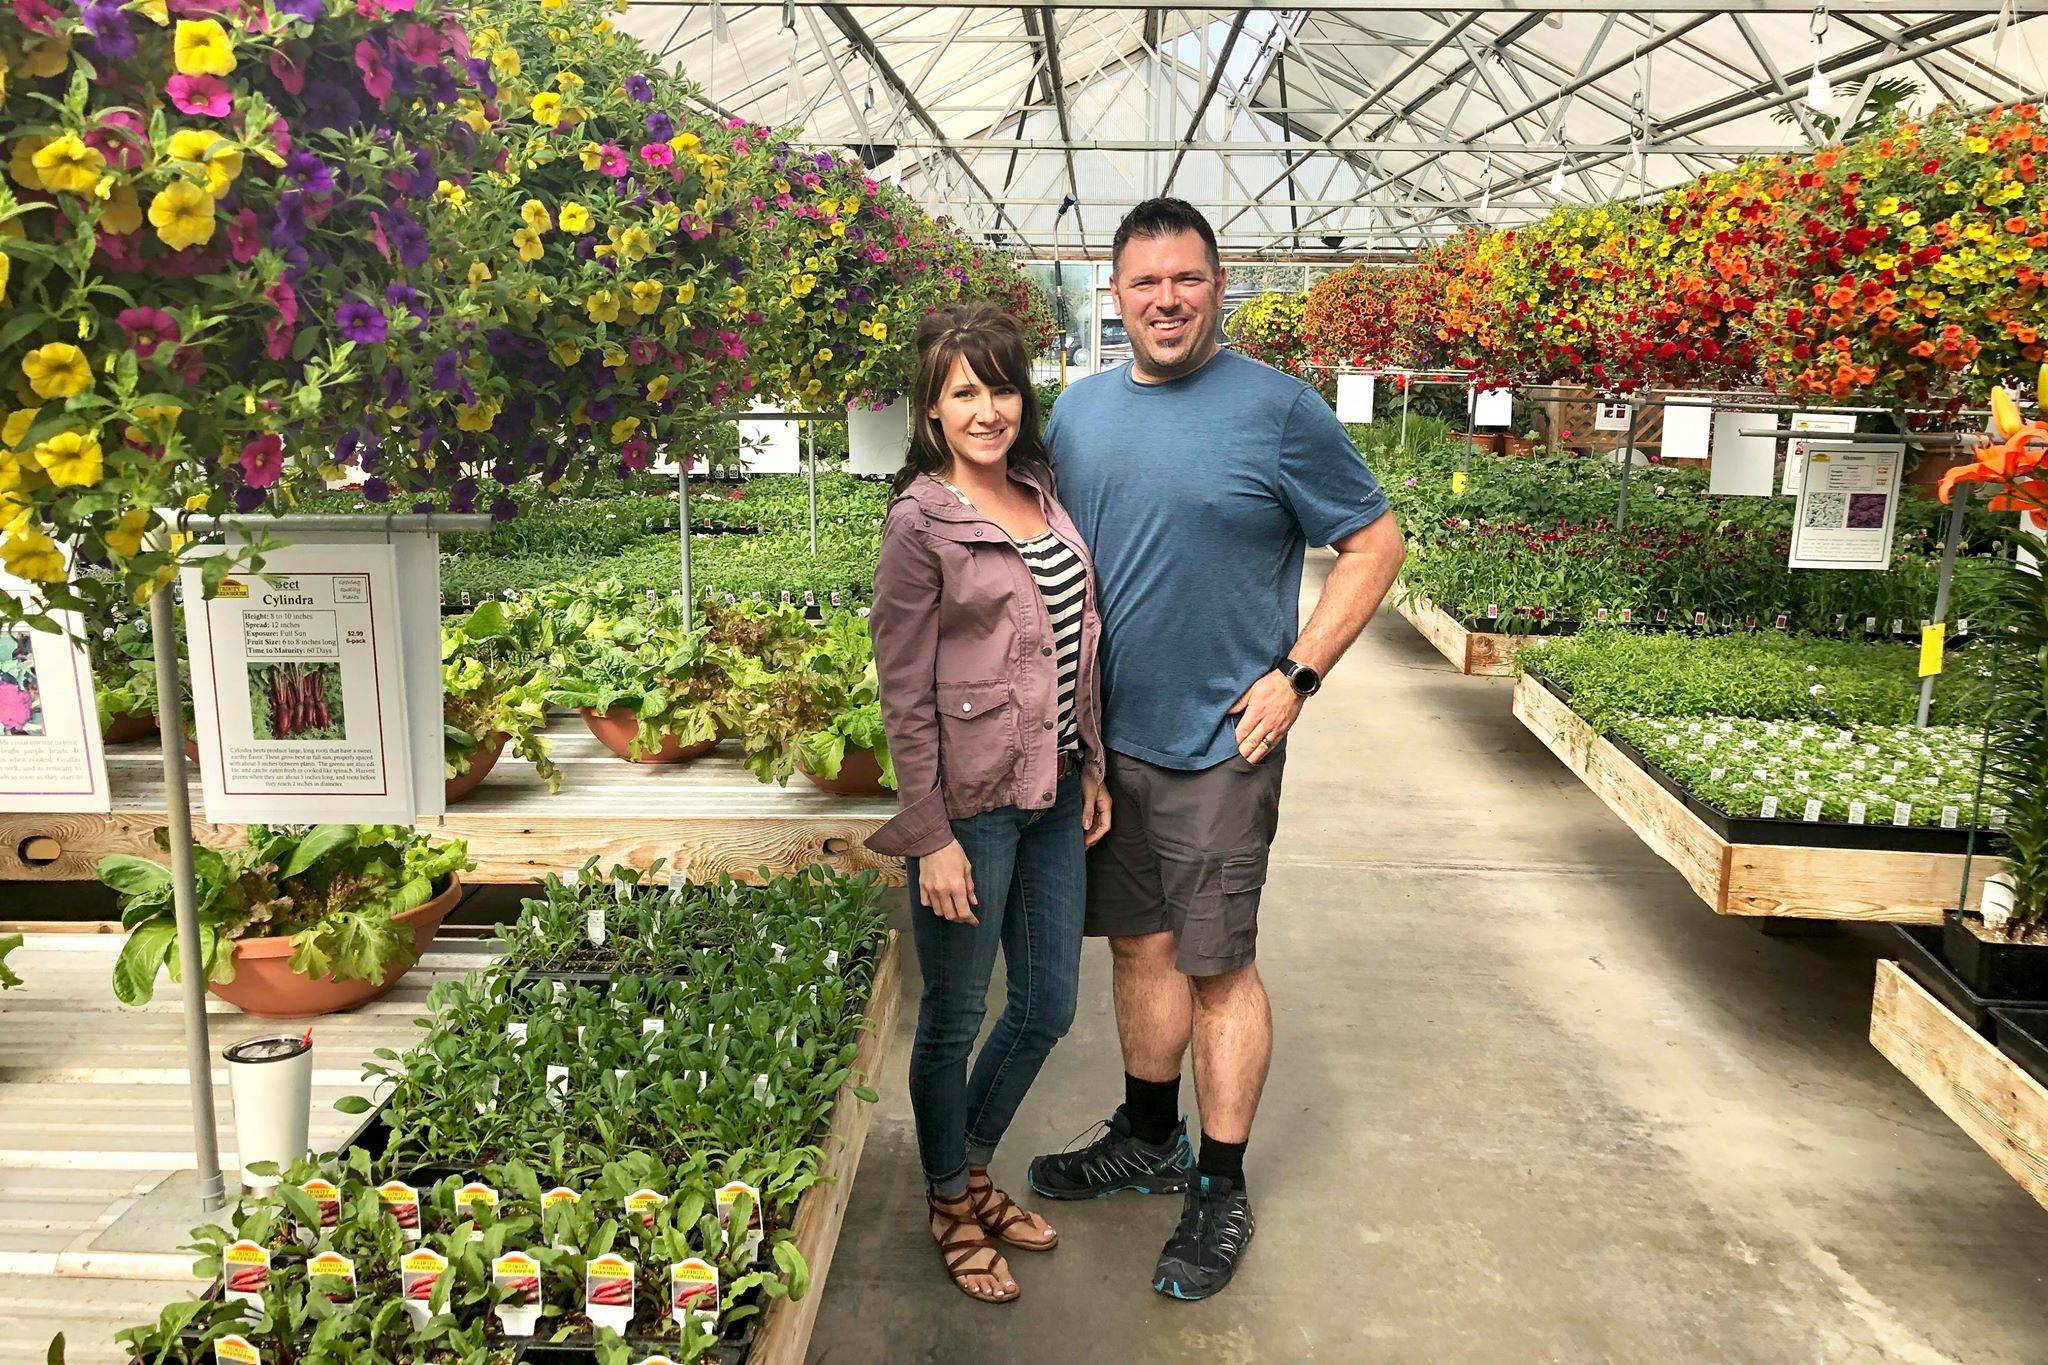 Owners Jessica and Darren Henry are pictured at Trinity Greenhouse on Monday, June 3, 2019, near Kenai, Alaska. (Photo by Victoria Petersen/Peninsula Clarion)